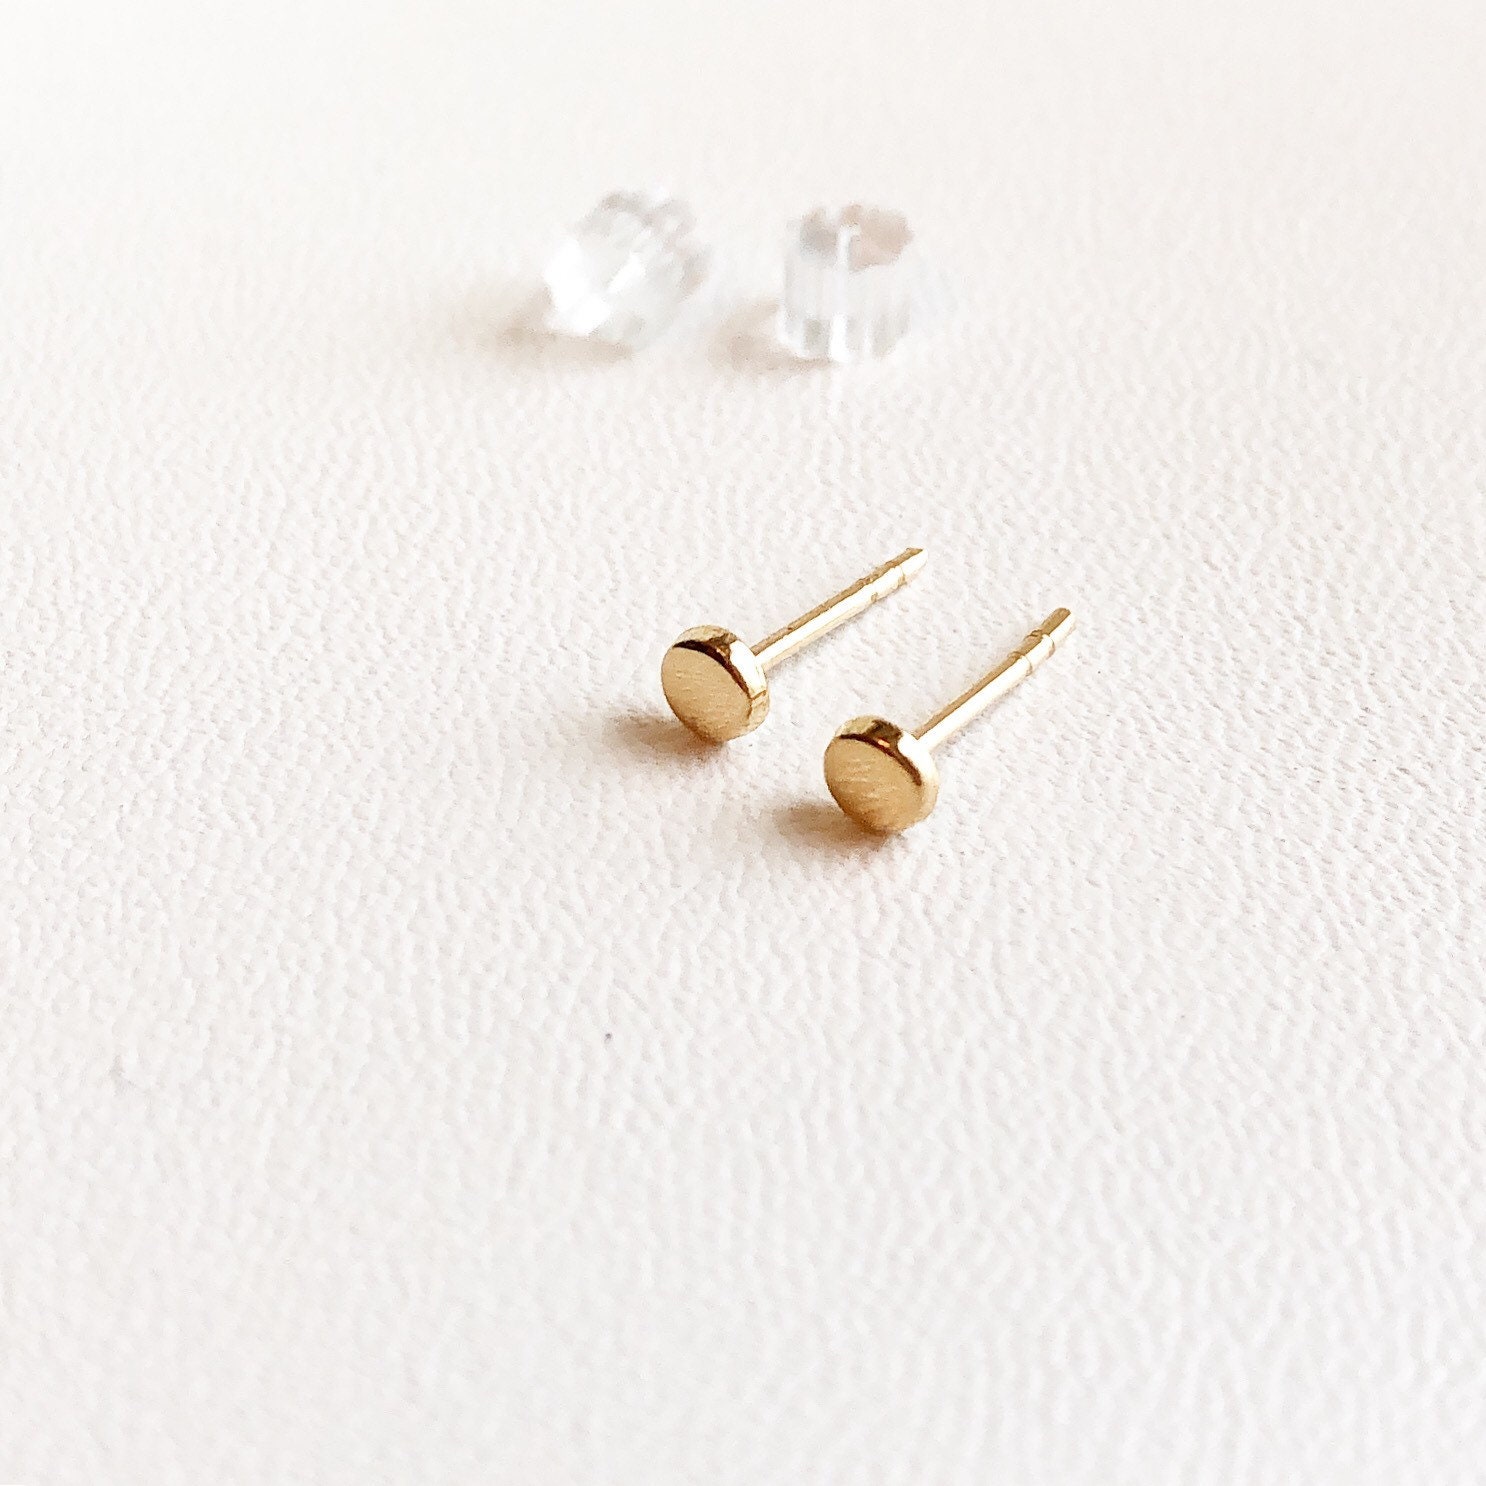 14K Solid Yellow Gold 3mm Studs Earrings TINY Classic 3mm | Etsy